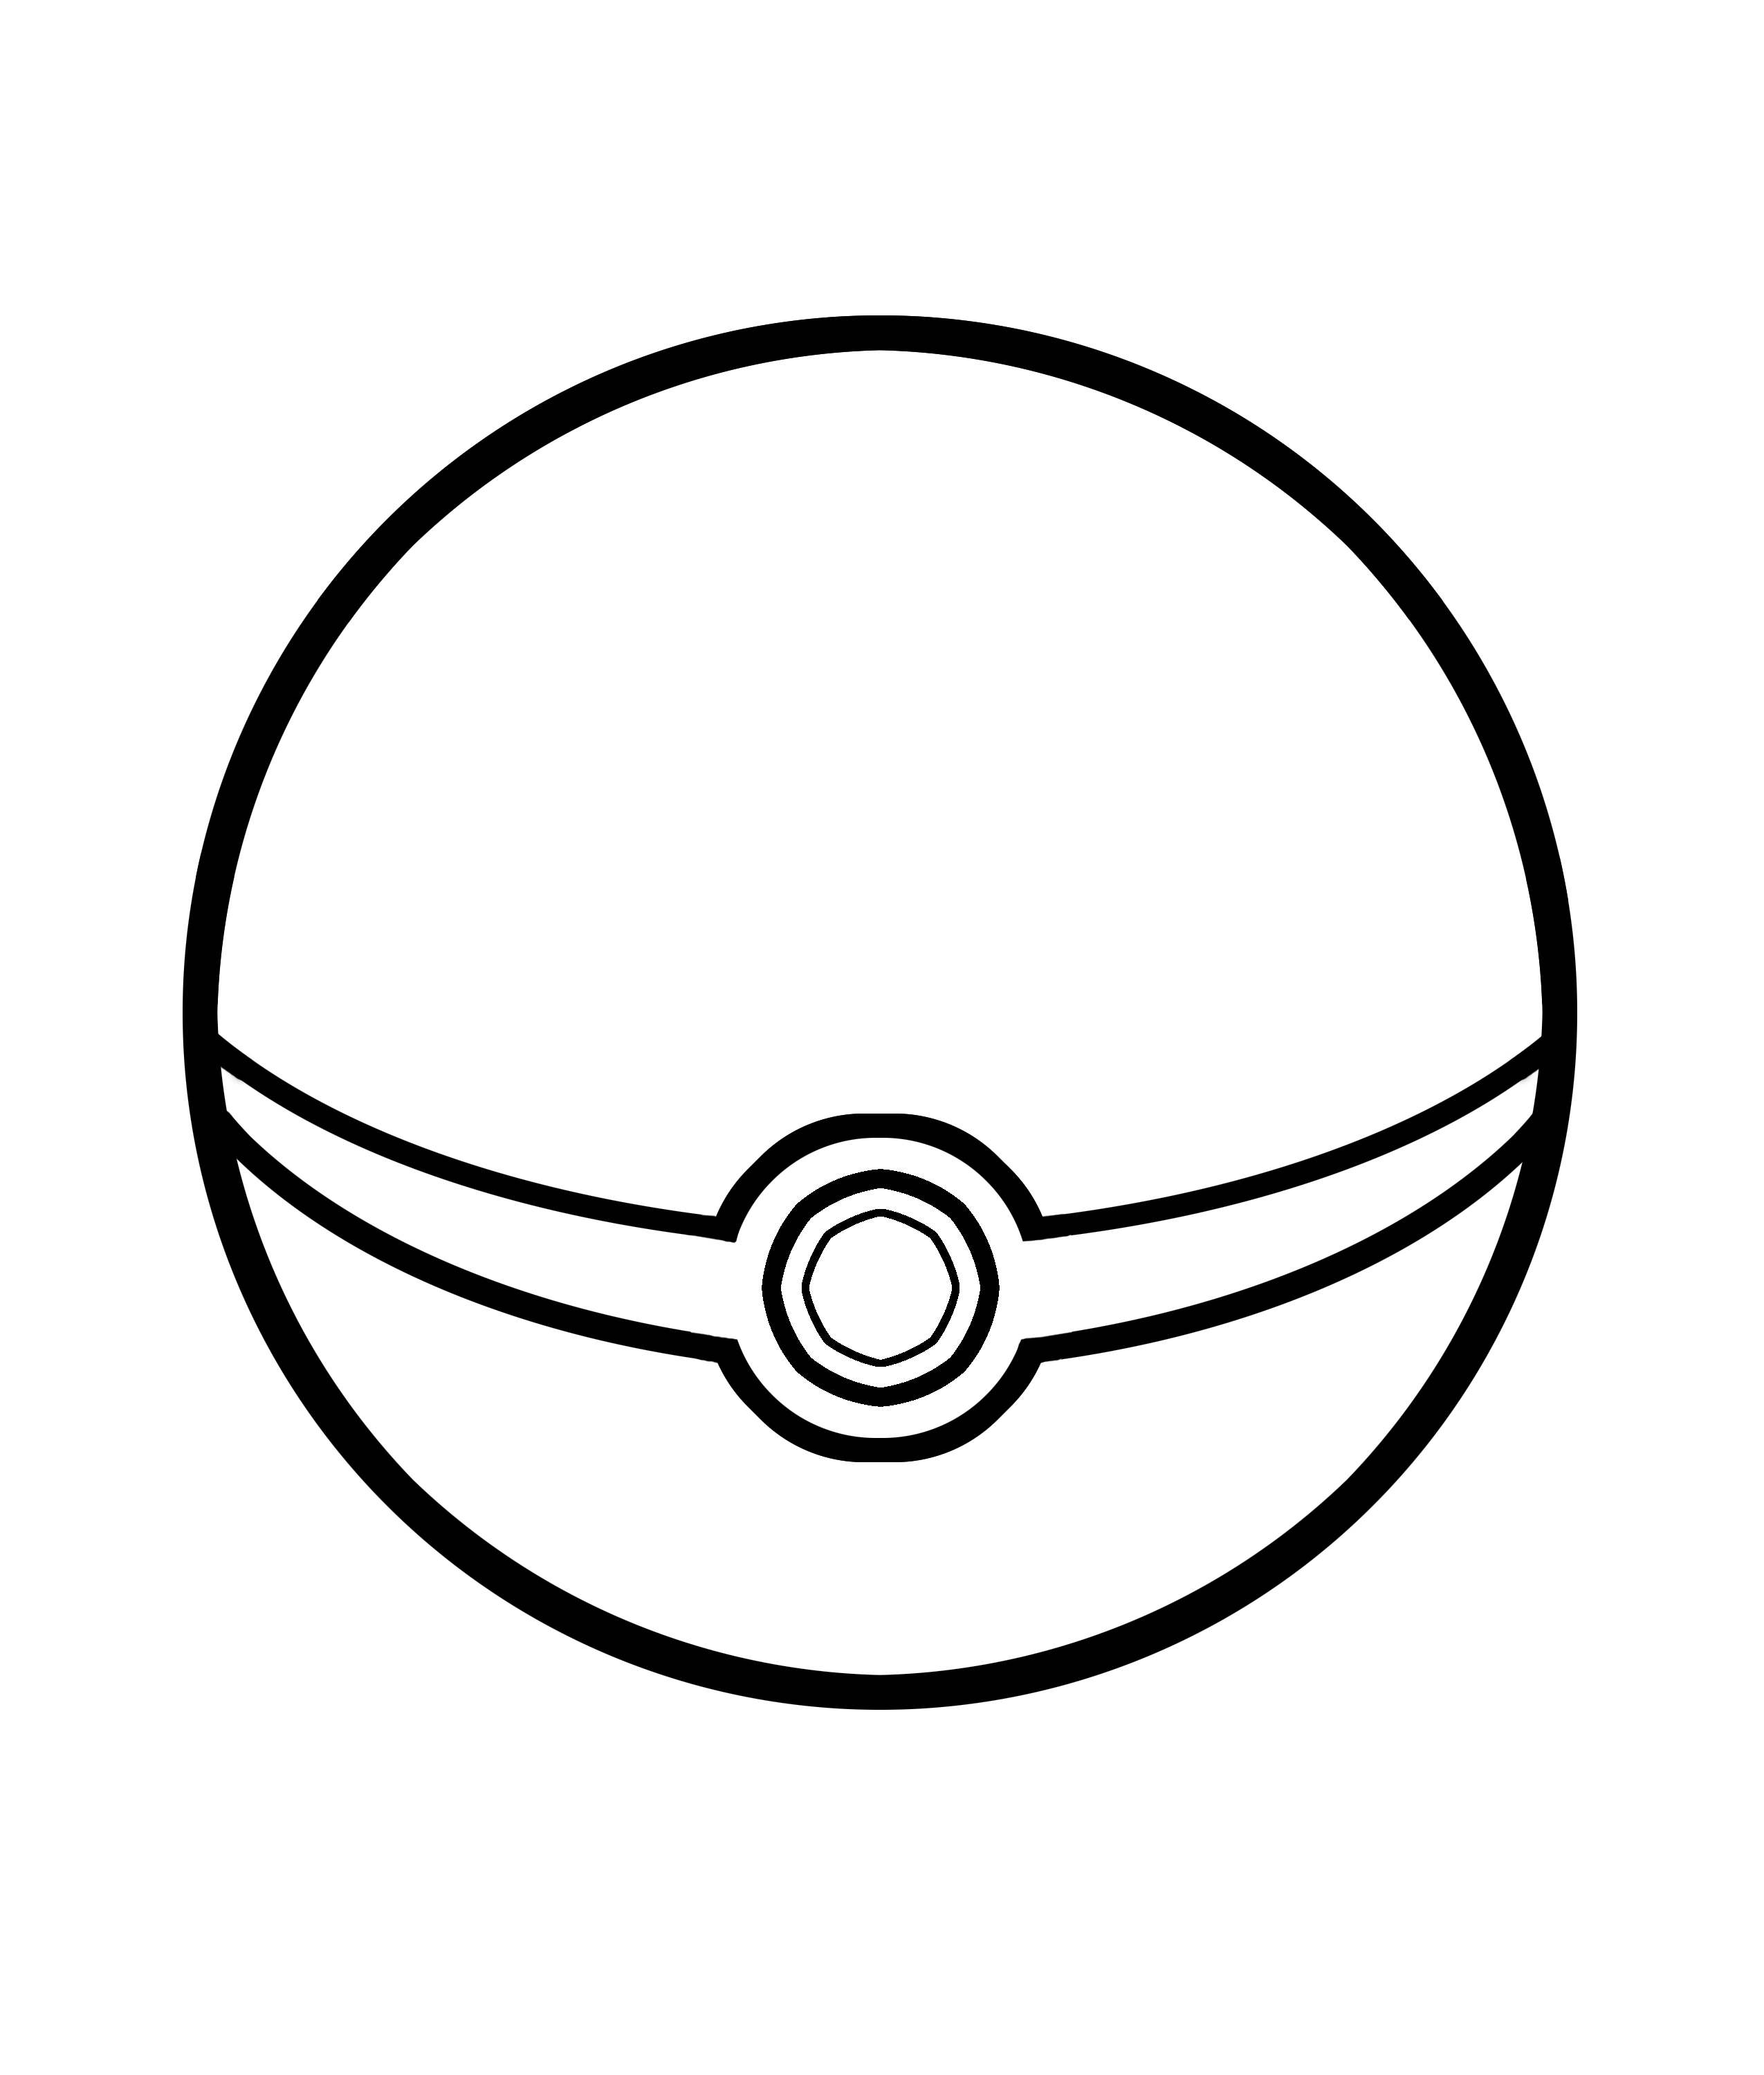 Pokemon Ball Coloring Pages within pokeballs Colouring Pages ...